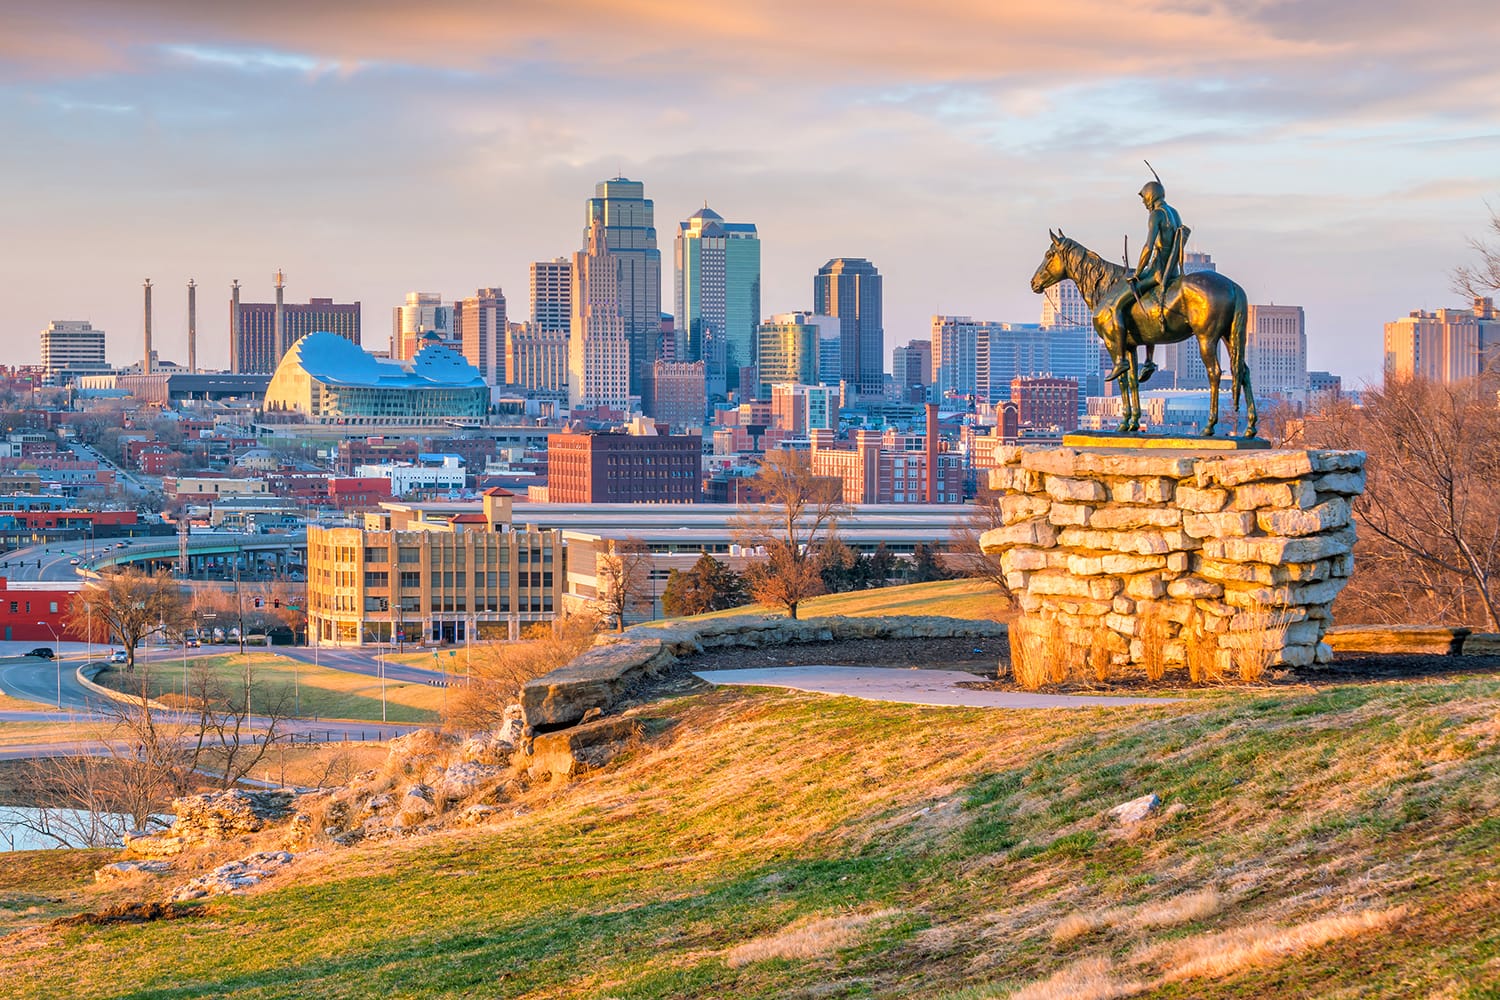 The Scout statue overlooking downtown Kansas City.